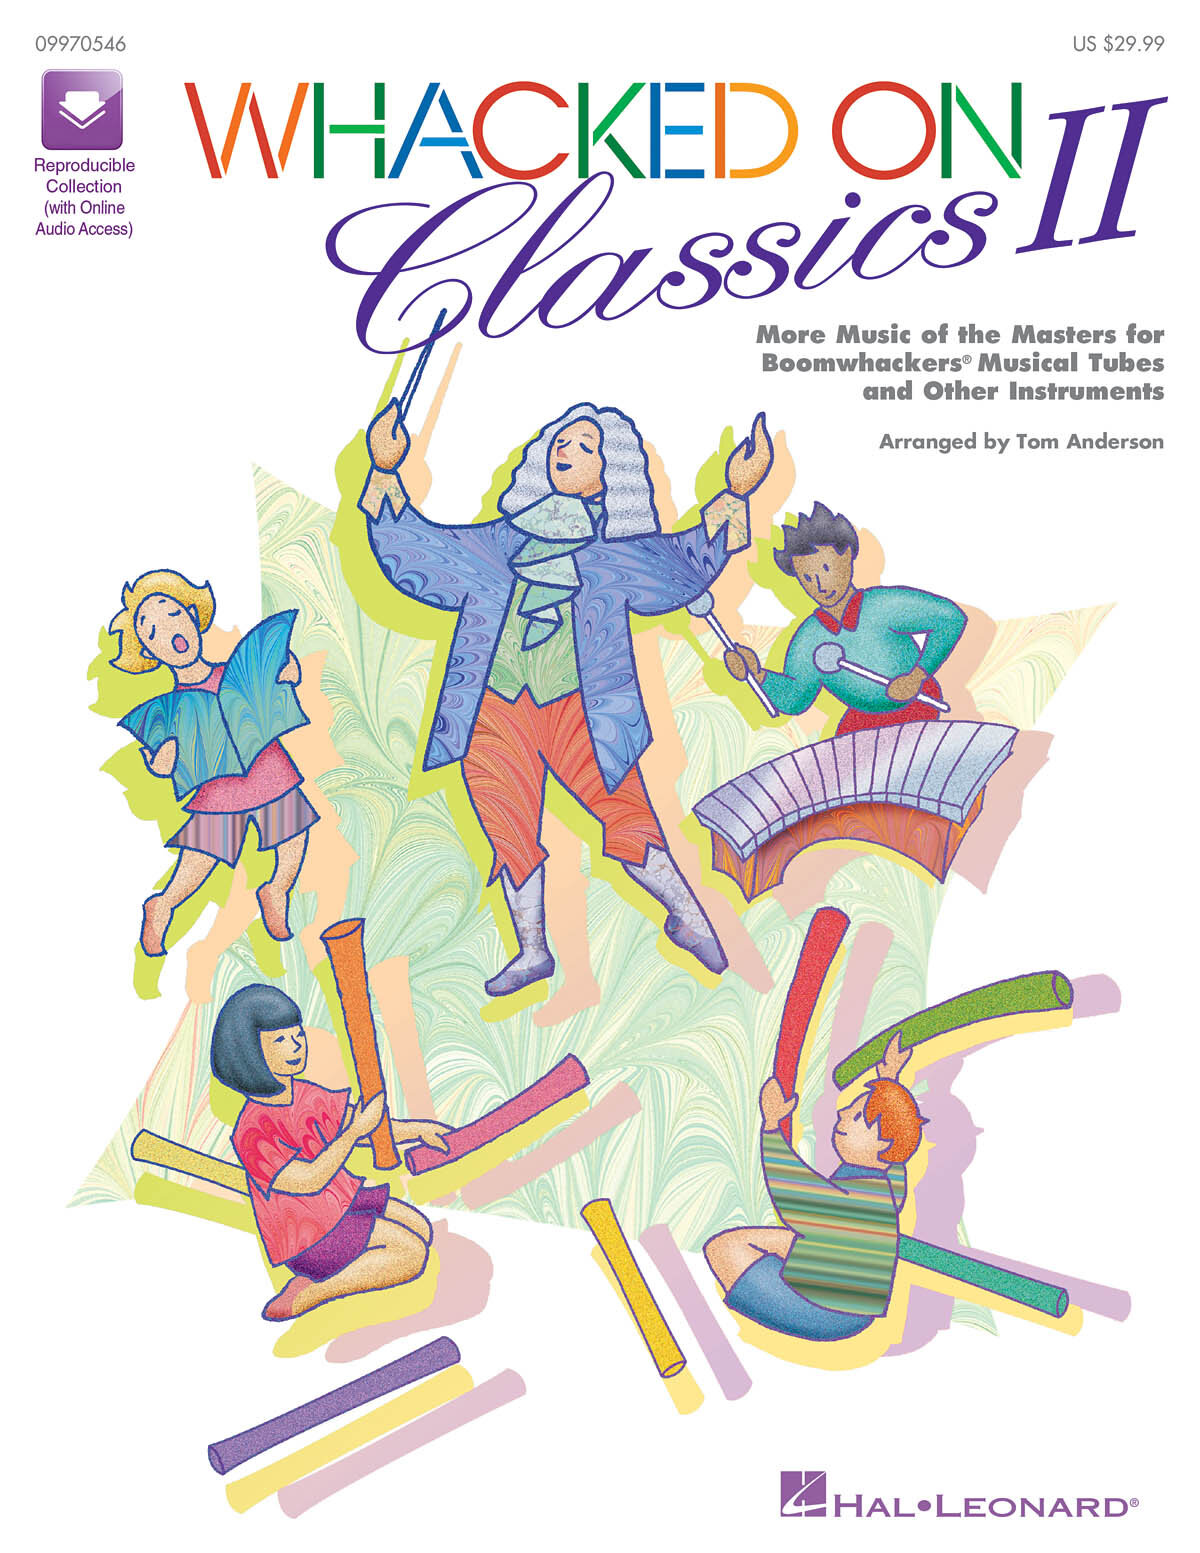 Hal Leonard Whacked On Classics II More Music of the Masters for Boomwhackers & Other Instruments  Tom Anderson Choir Buch + CD  HL09970546 (HL09970546) : photo 1